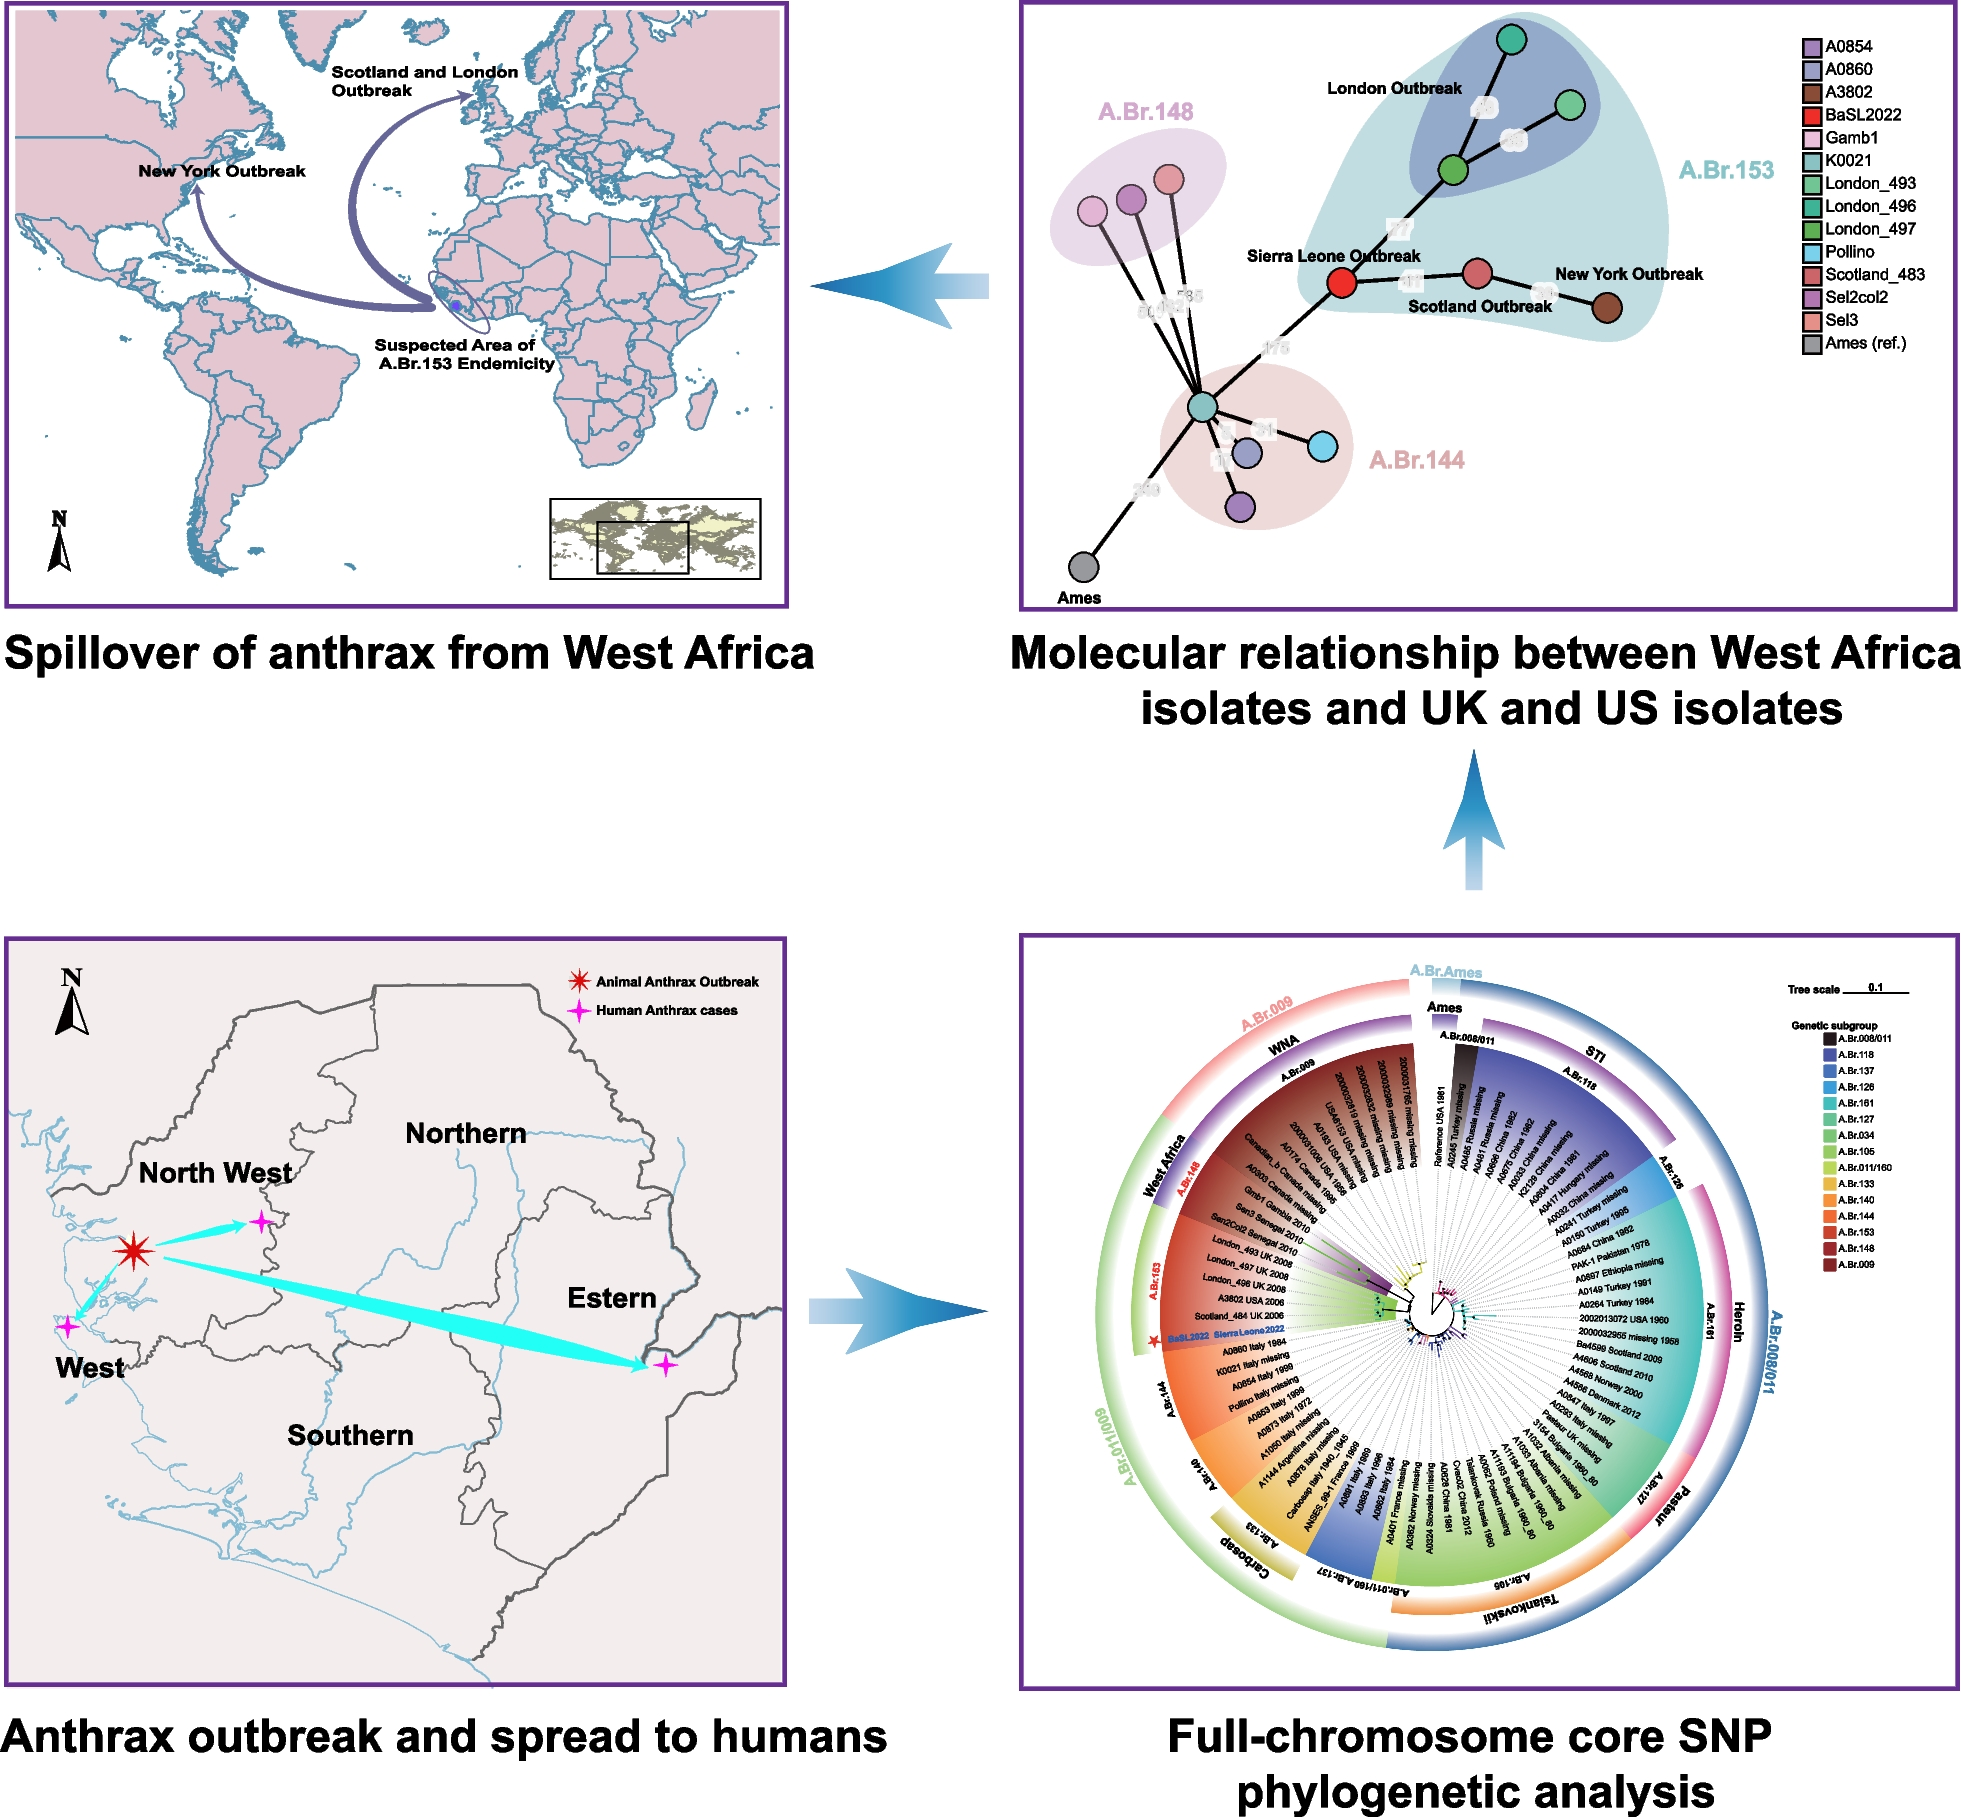 Molecular characterization of an outbreak-involved Bacillus anthracis strain confirms the spillover of anthrax from West Africa